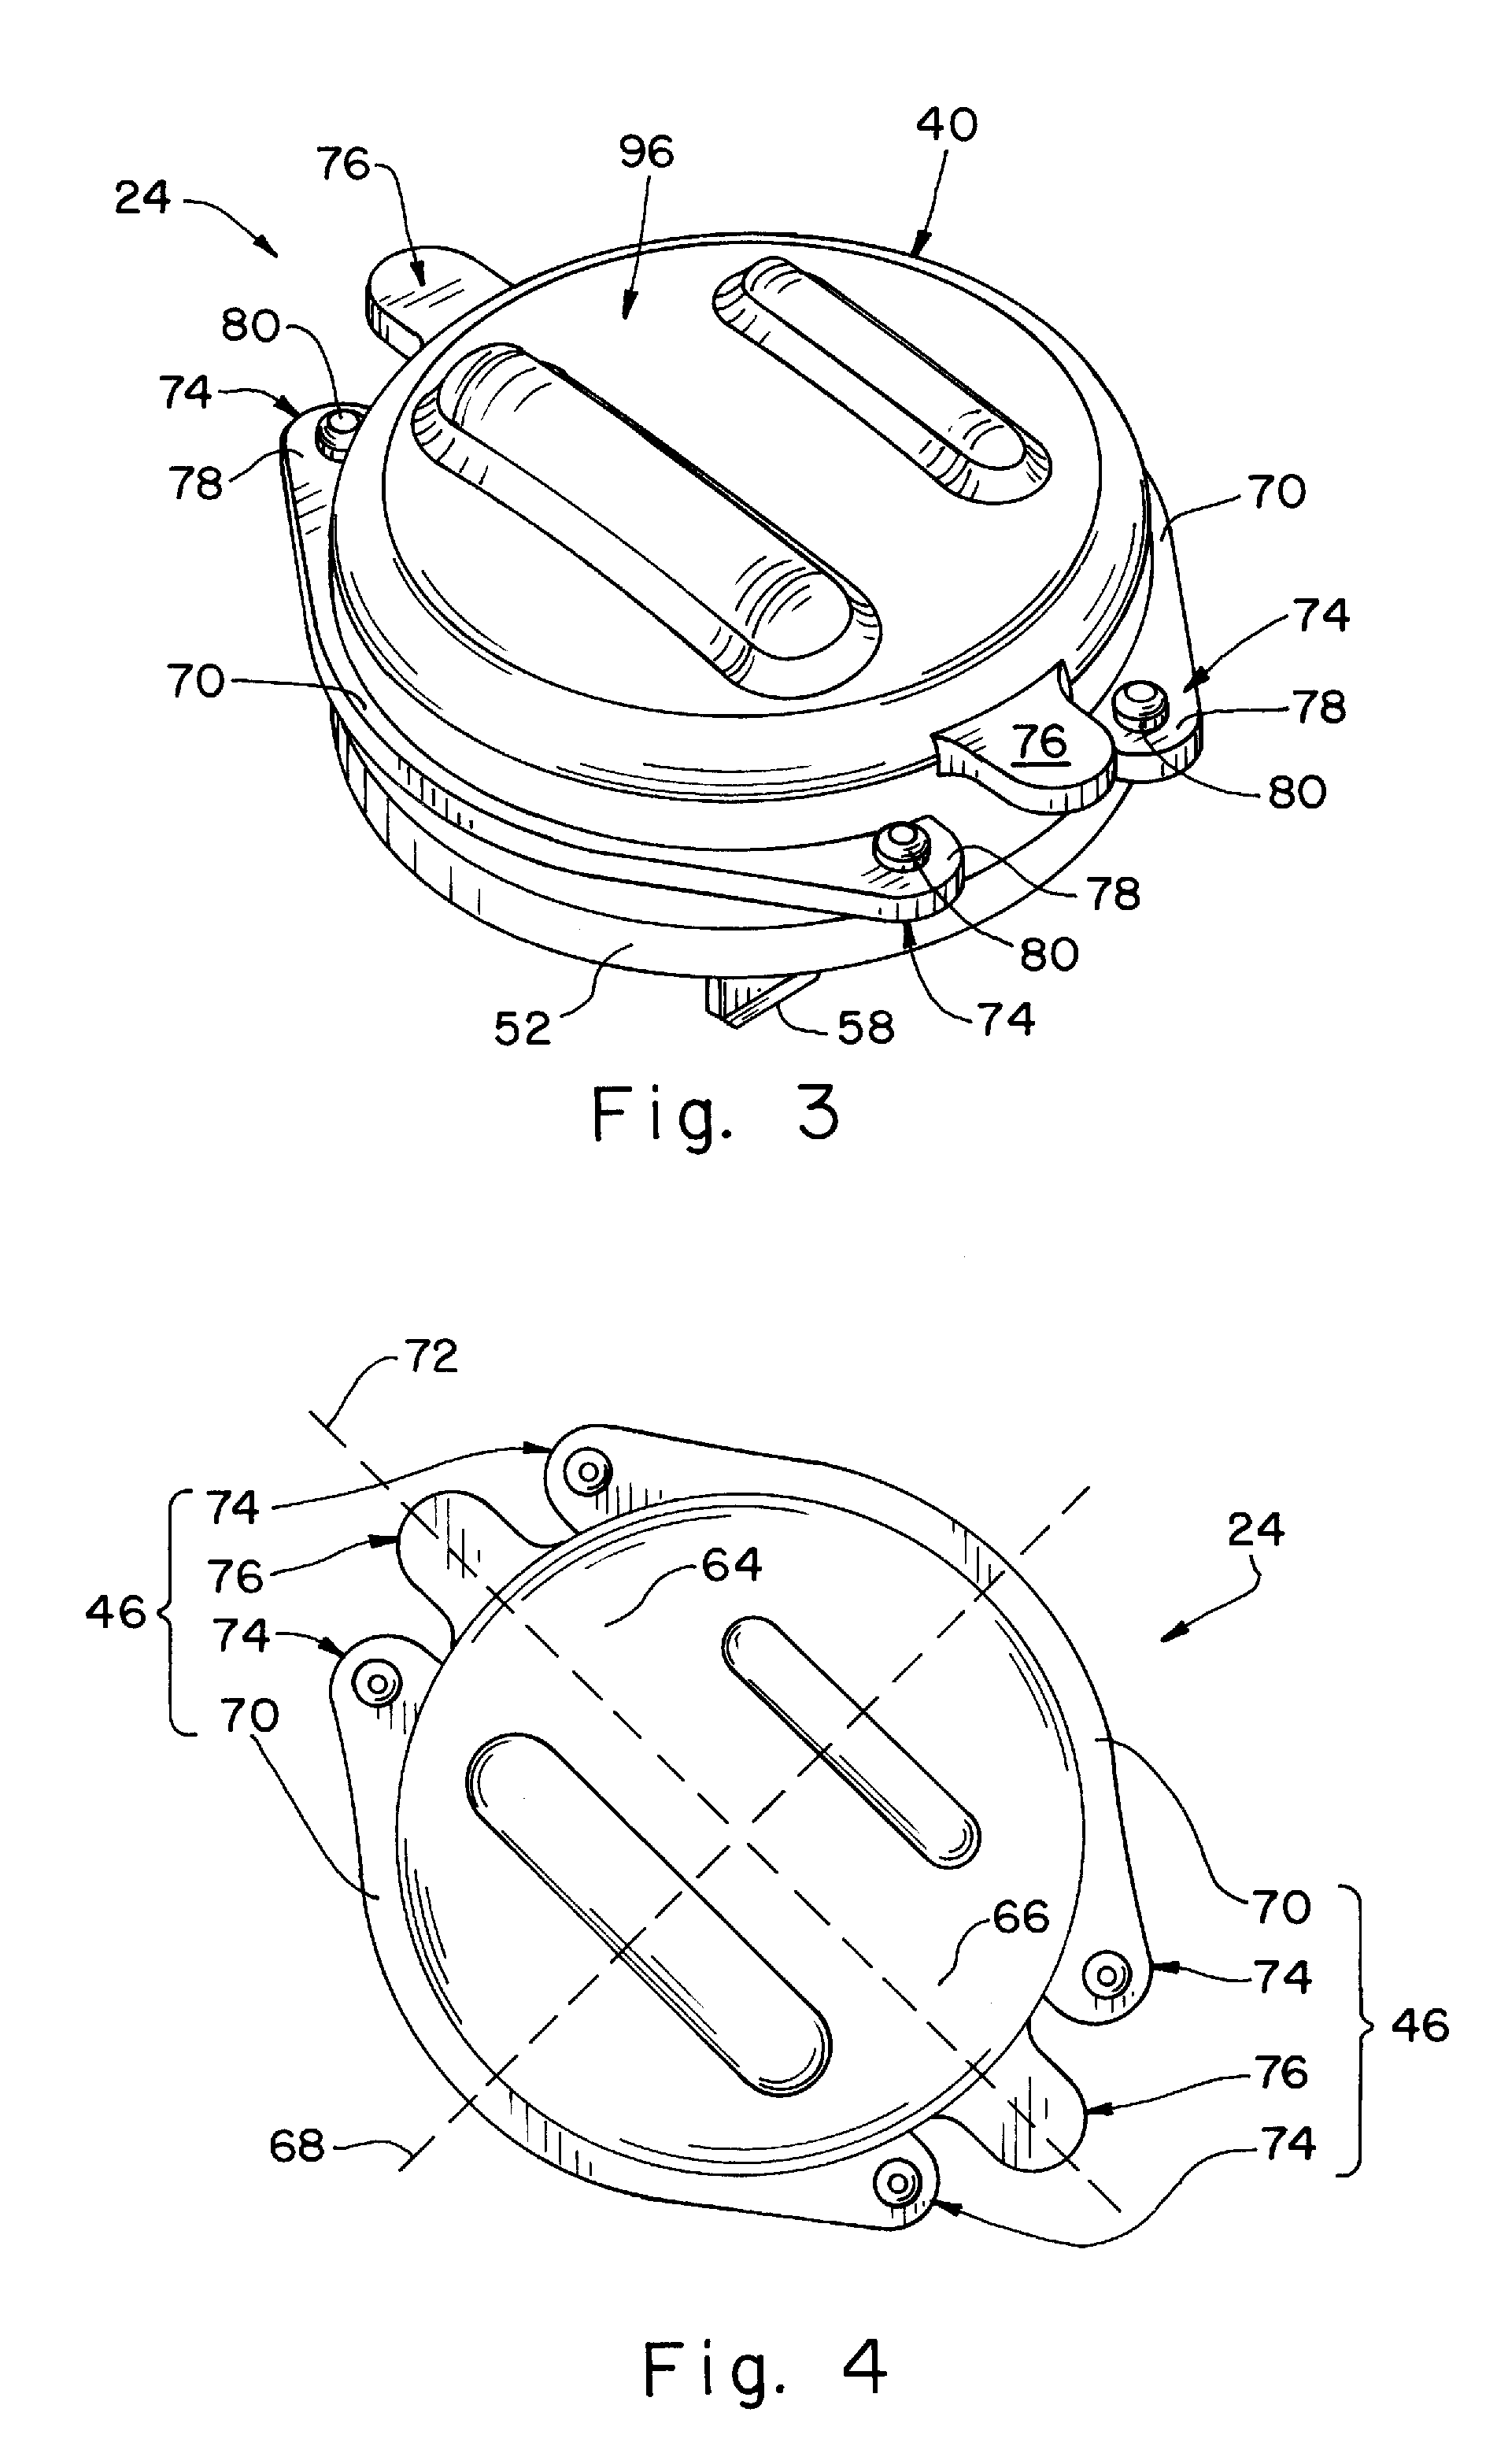 Thermal assembly coupled with an appliance